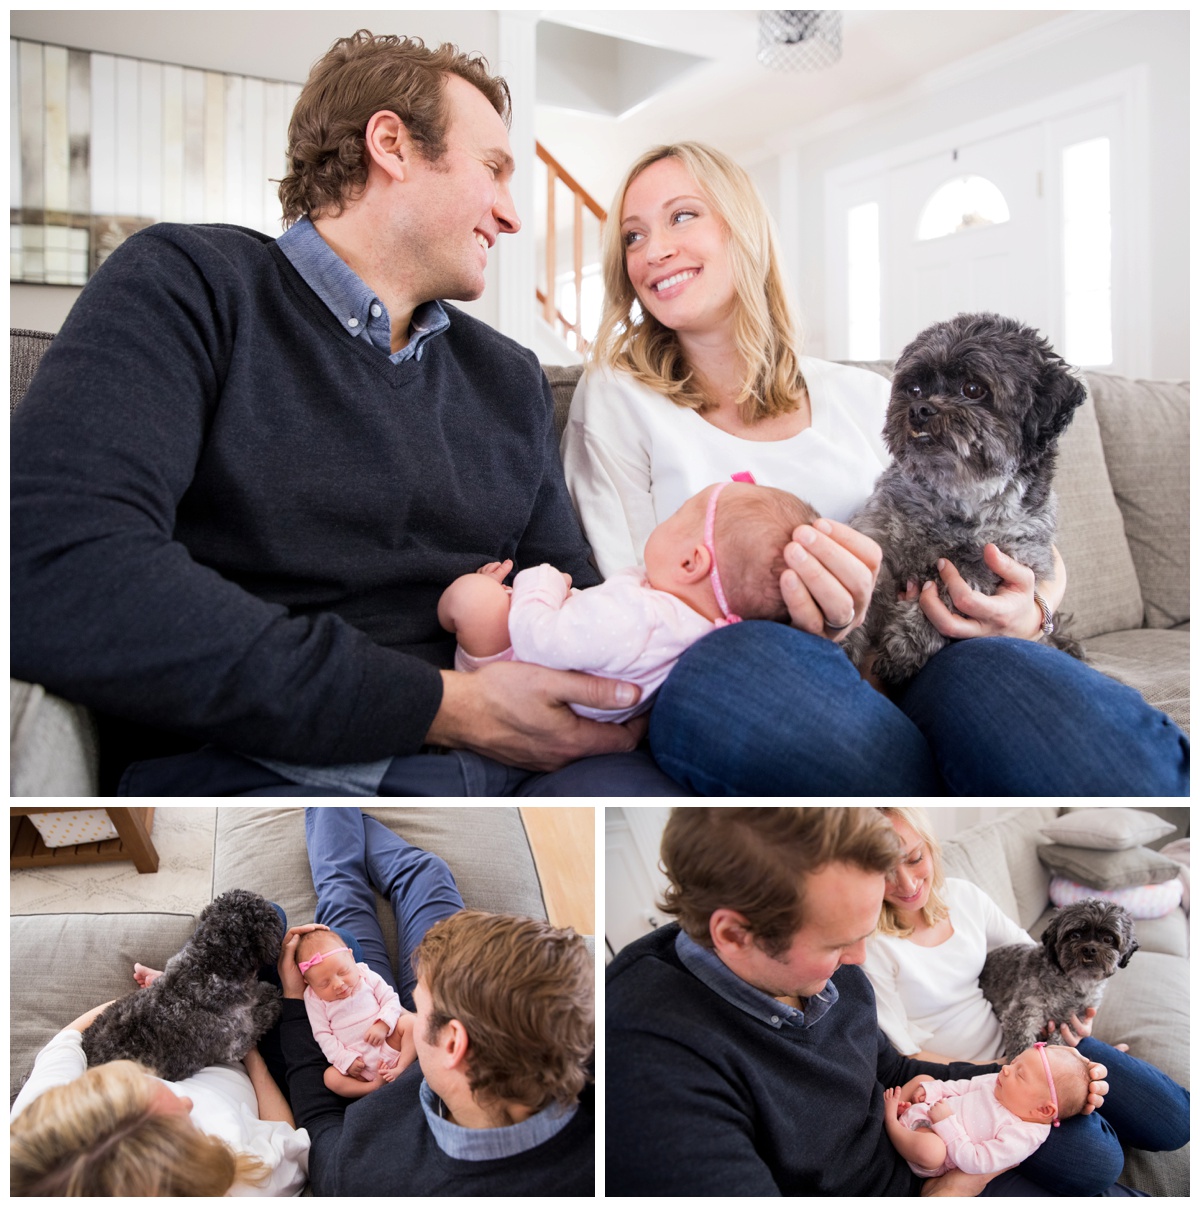 newborn baby photoshoot with family and dog on couch